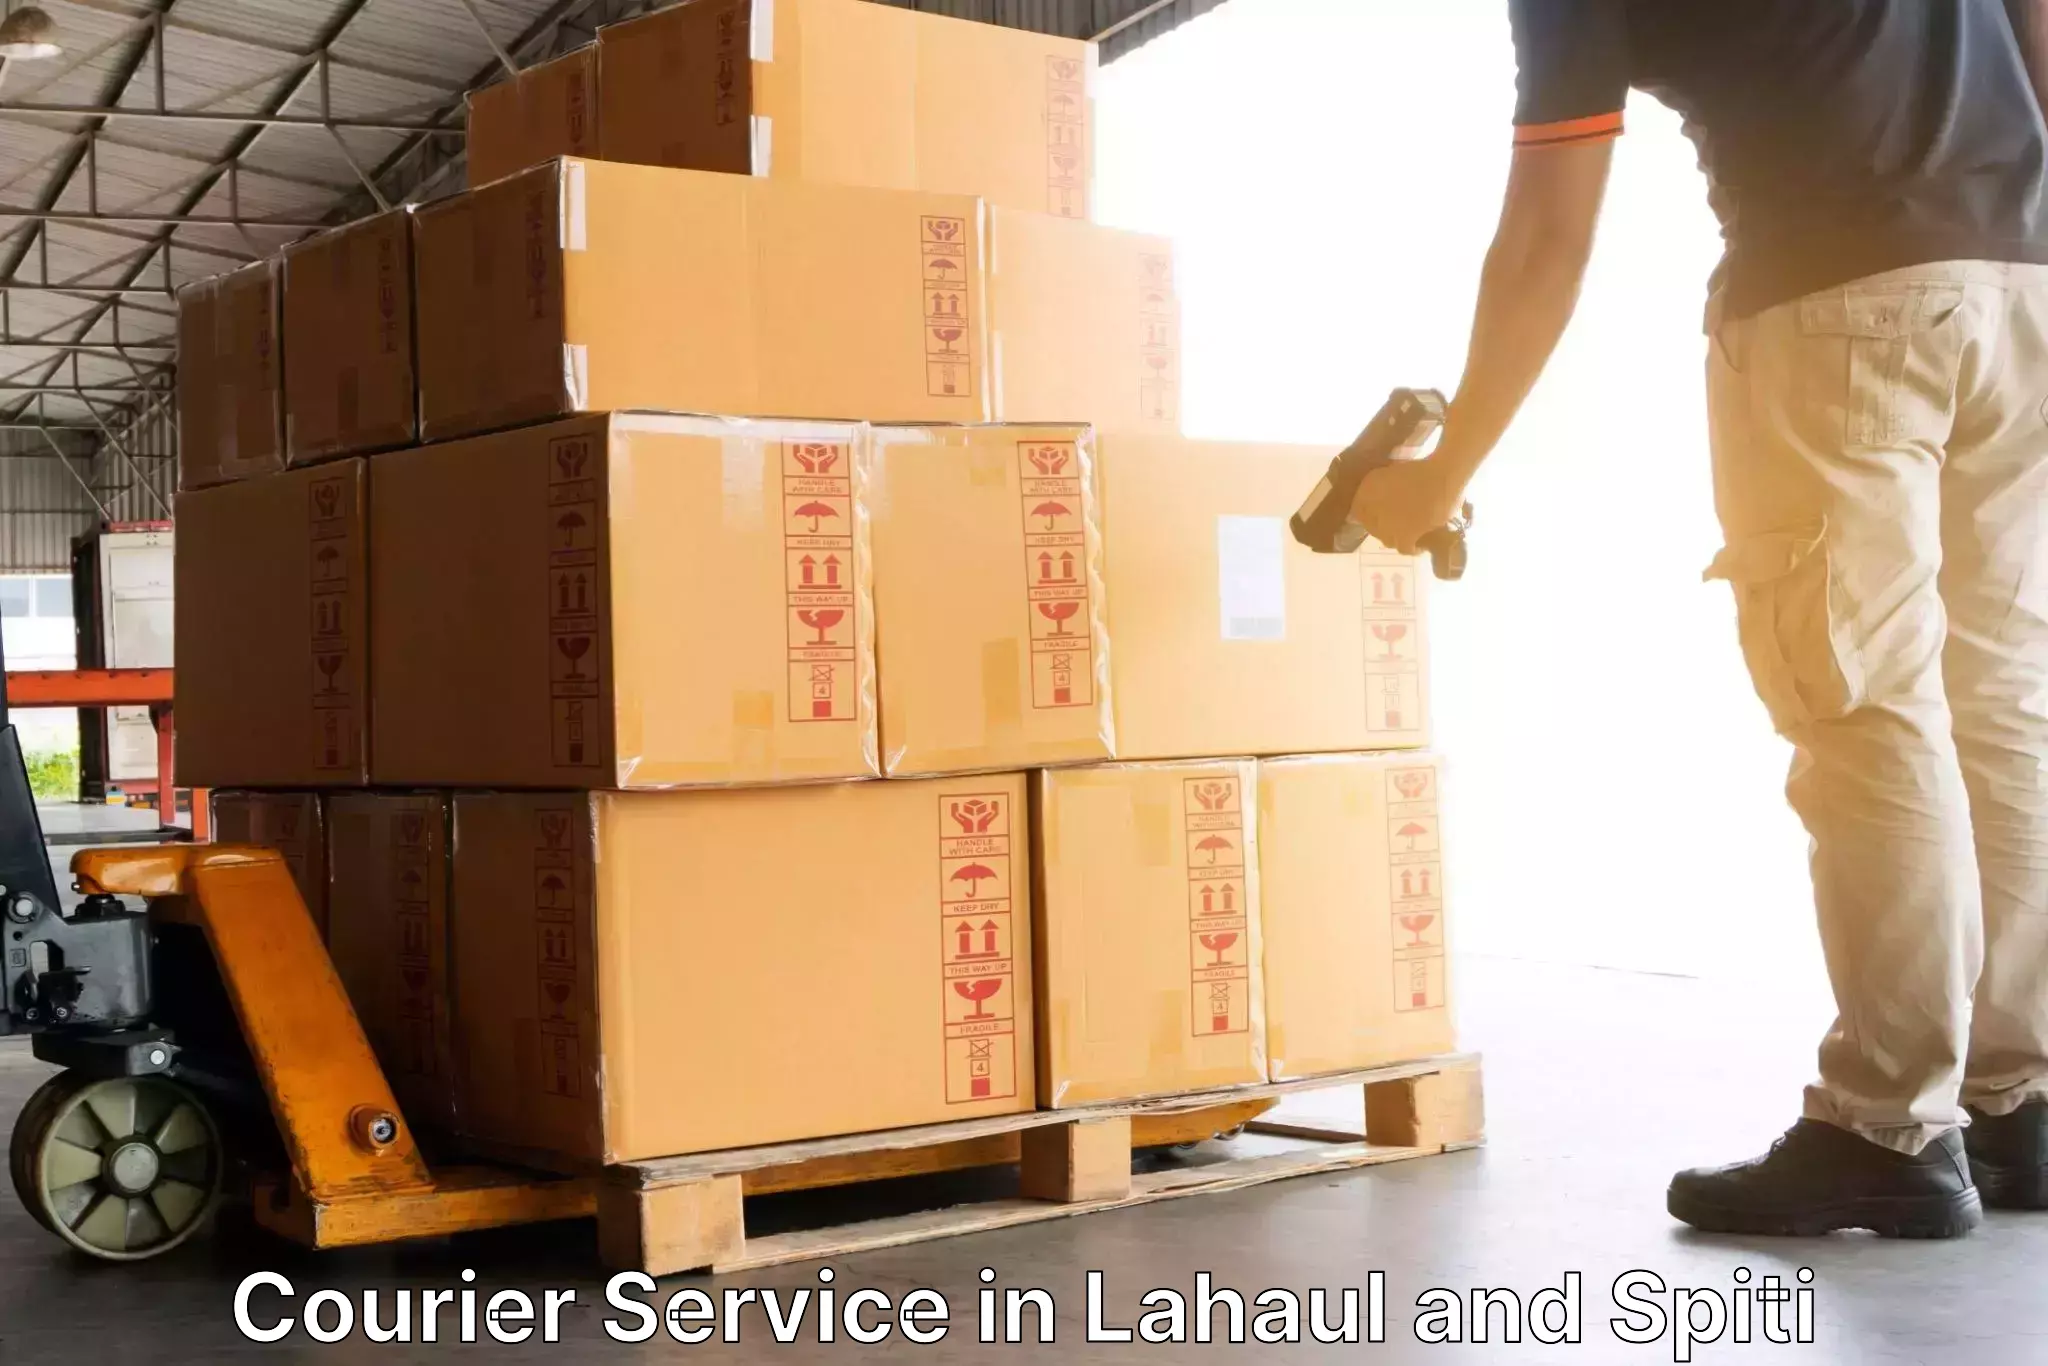 Reliable courier service in Lahaul and Spiti